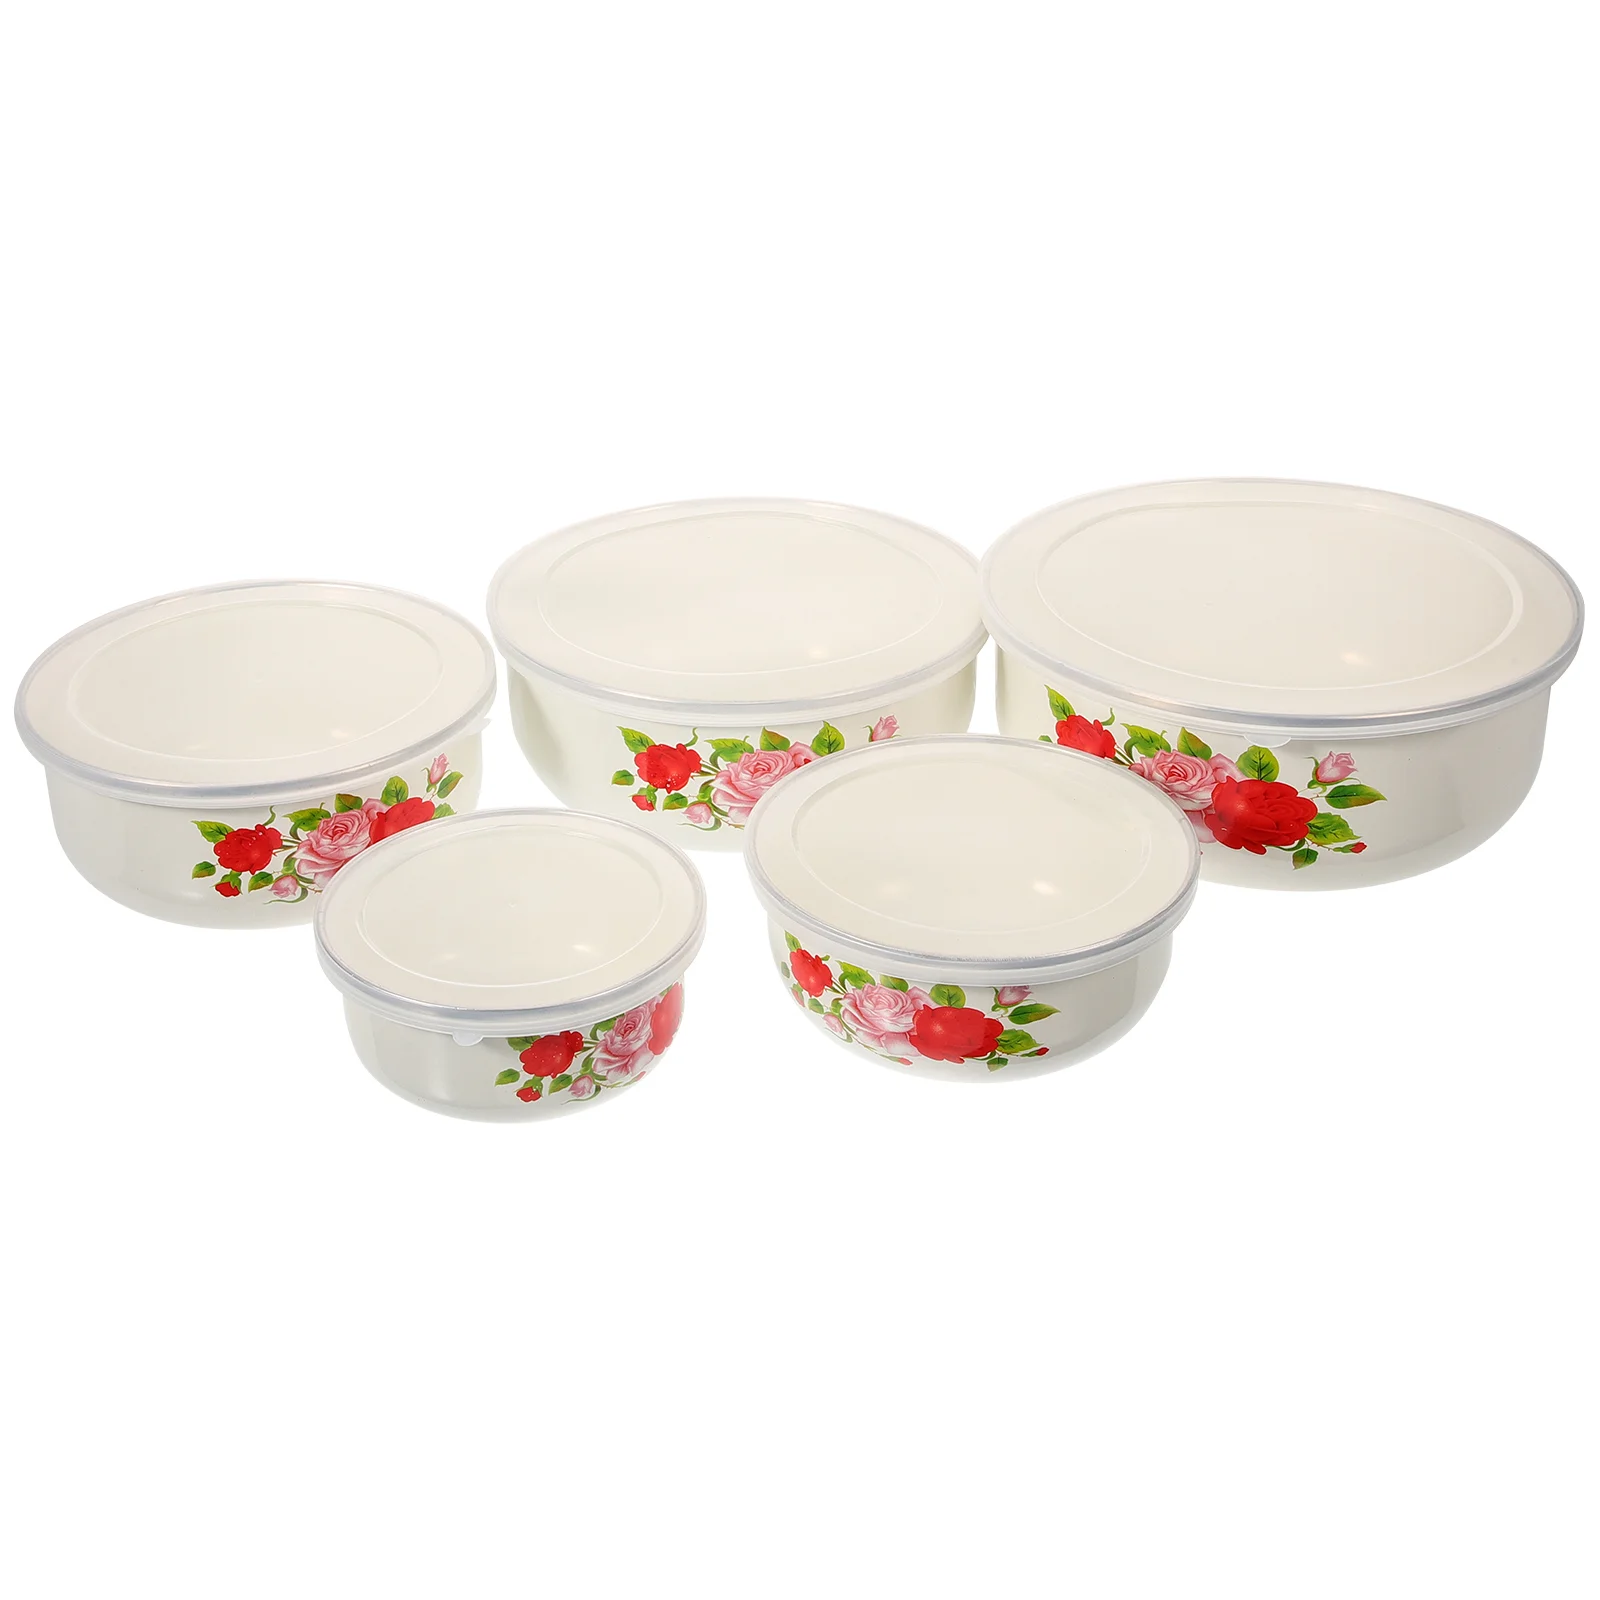 

Enamel Covered Bowl Enamelware Metal Mixing Bowls with Lids Food Salad Container Baby Kitchen Deepen Soup Serving